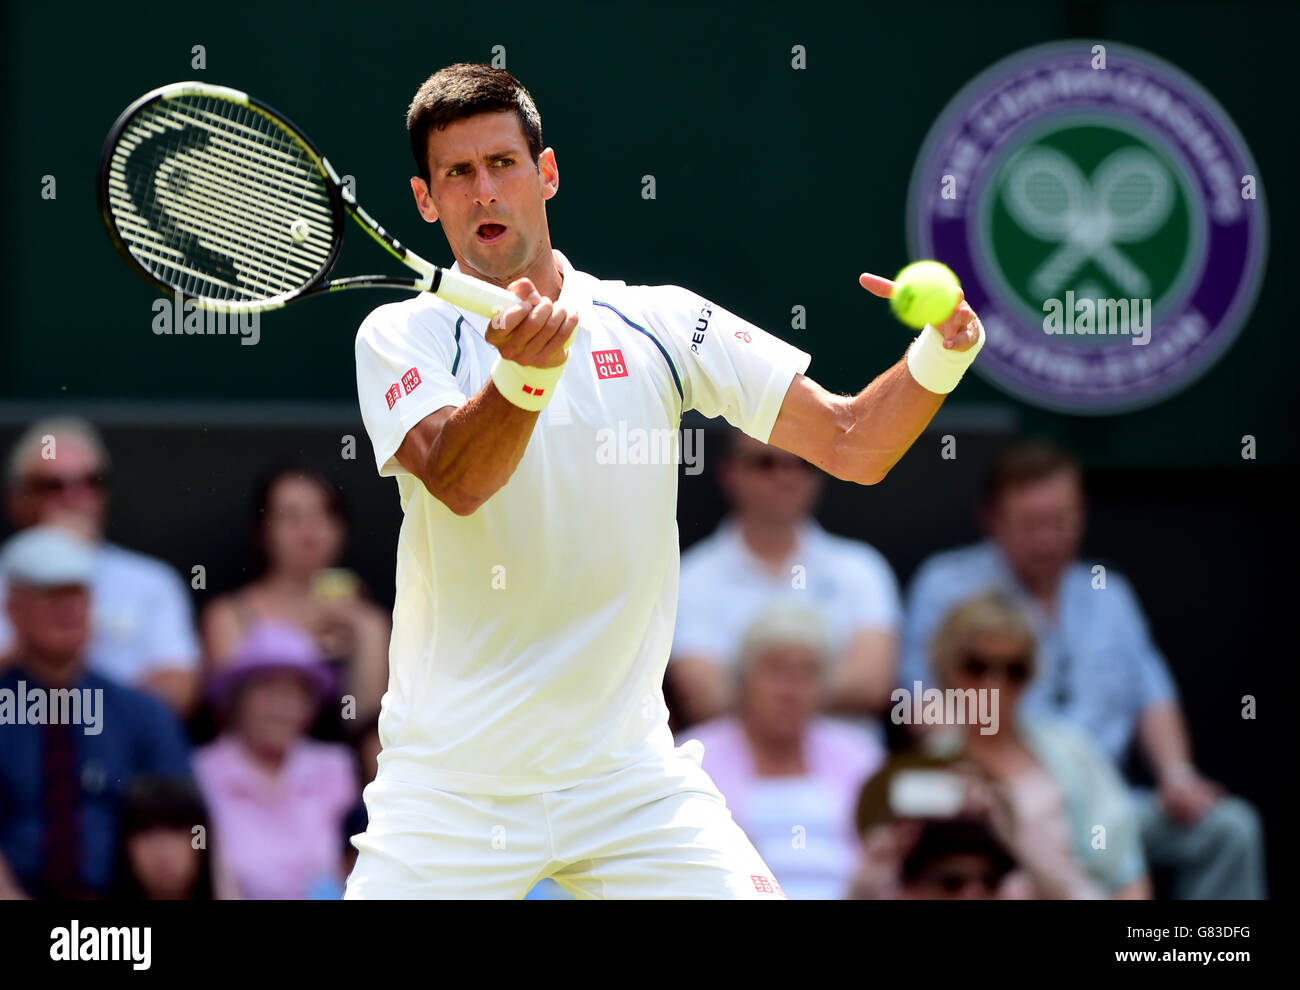 Novak Djokovic in action against Jarkko Nieminen during day Three of the Wimbledon Championships at the All England Lawn Tennis and Croquet Club, Wimbledon. Stock Photo